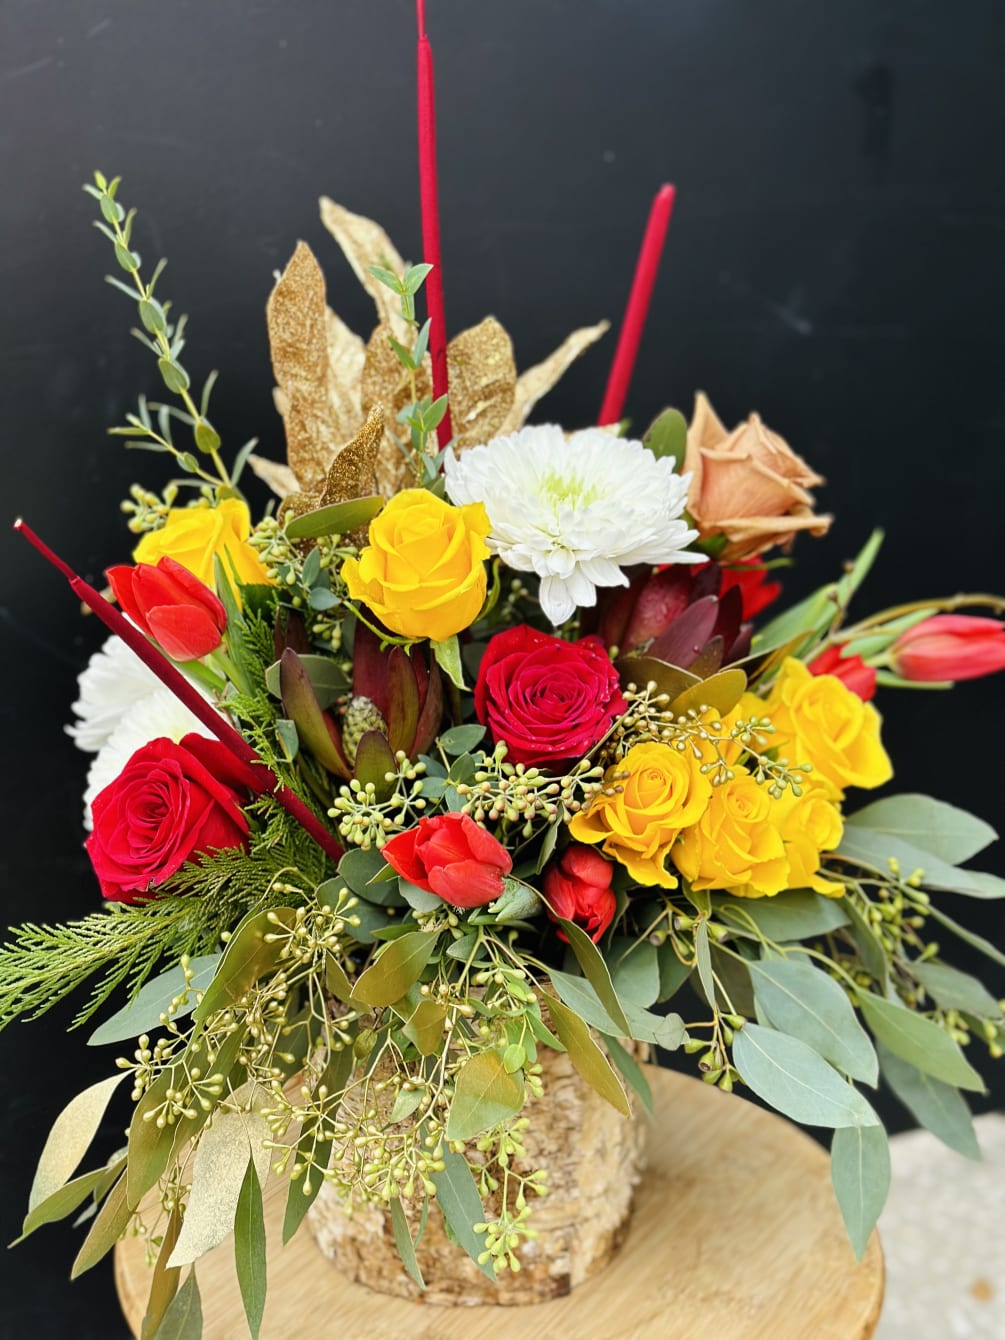 This arrangement will POP on any table or celebration! 
(1) artificial glittery